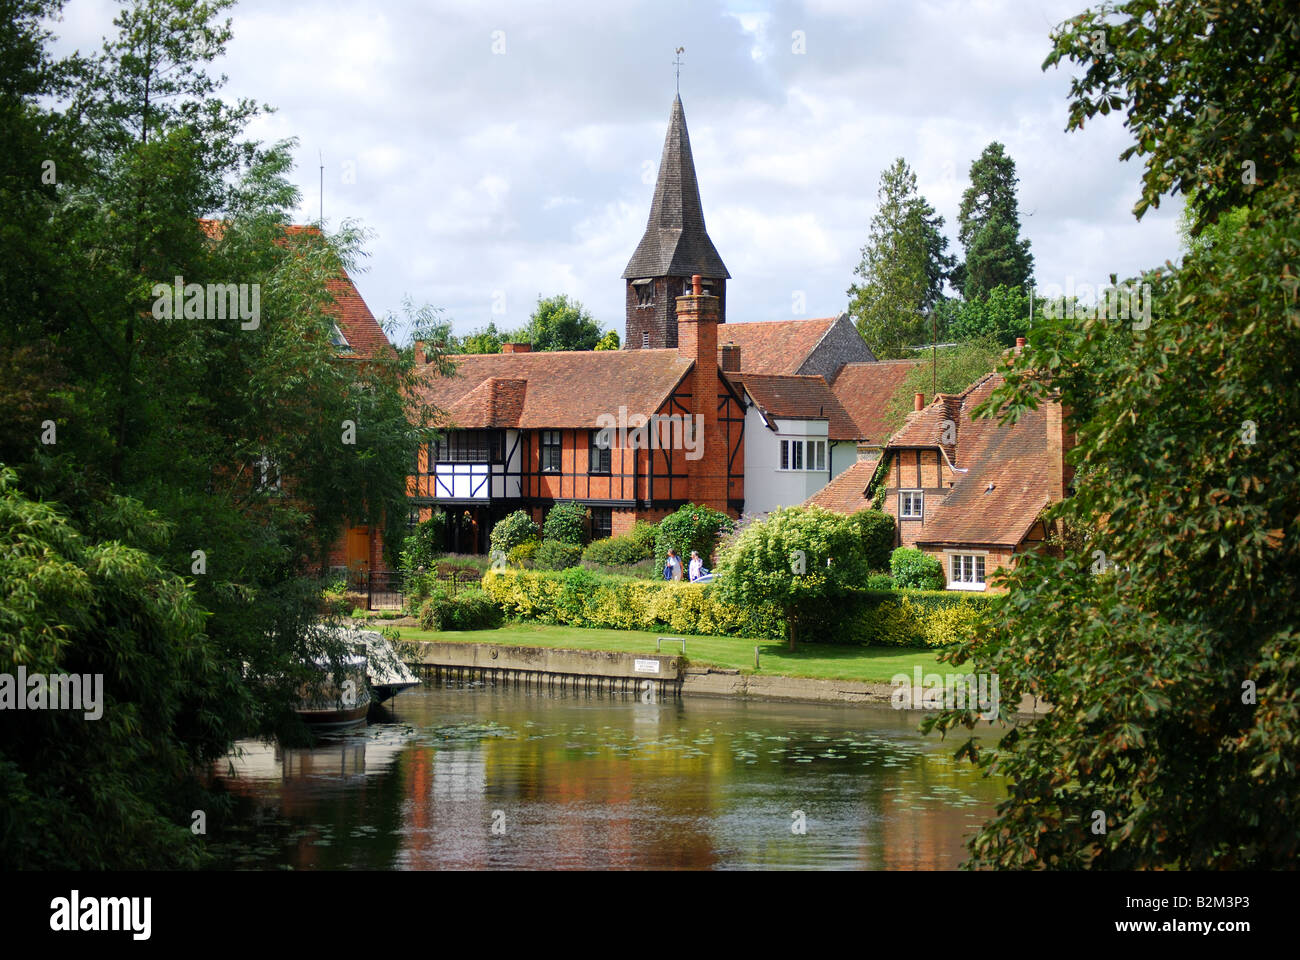 Village view across River Thames, Whitchurch-on-Thames, Oxfordshire, England, United Kingdom Stock Photo